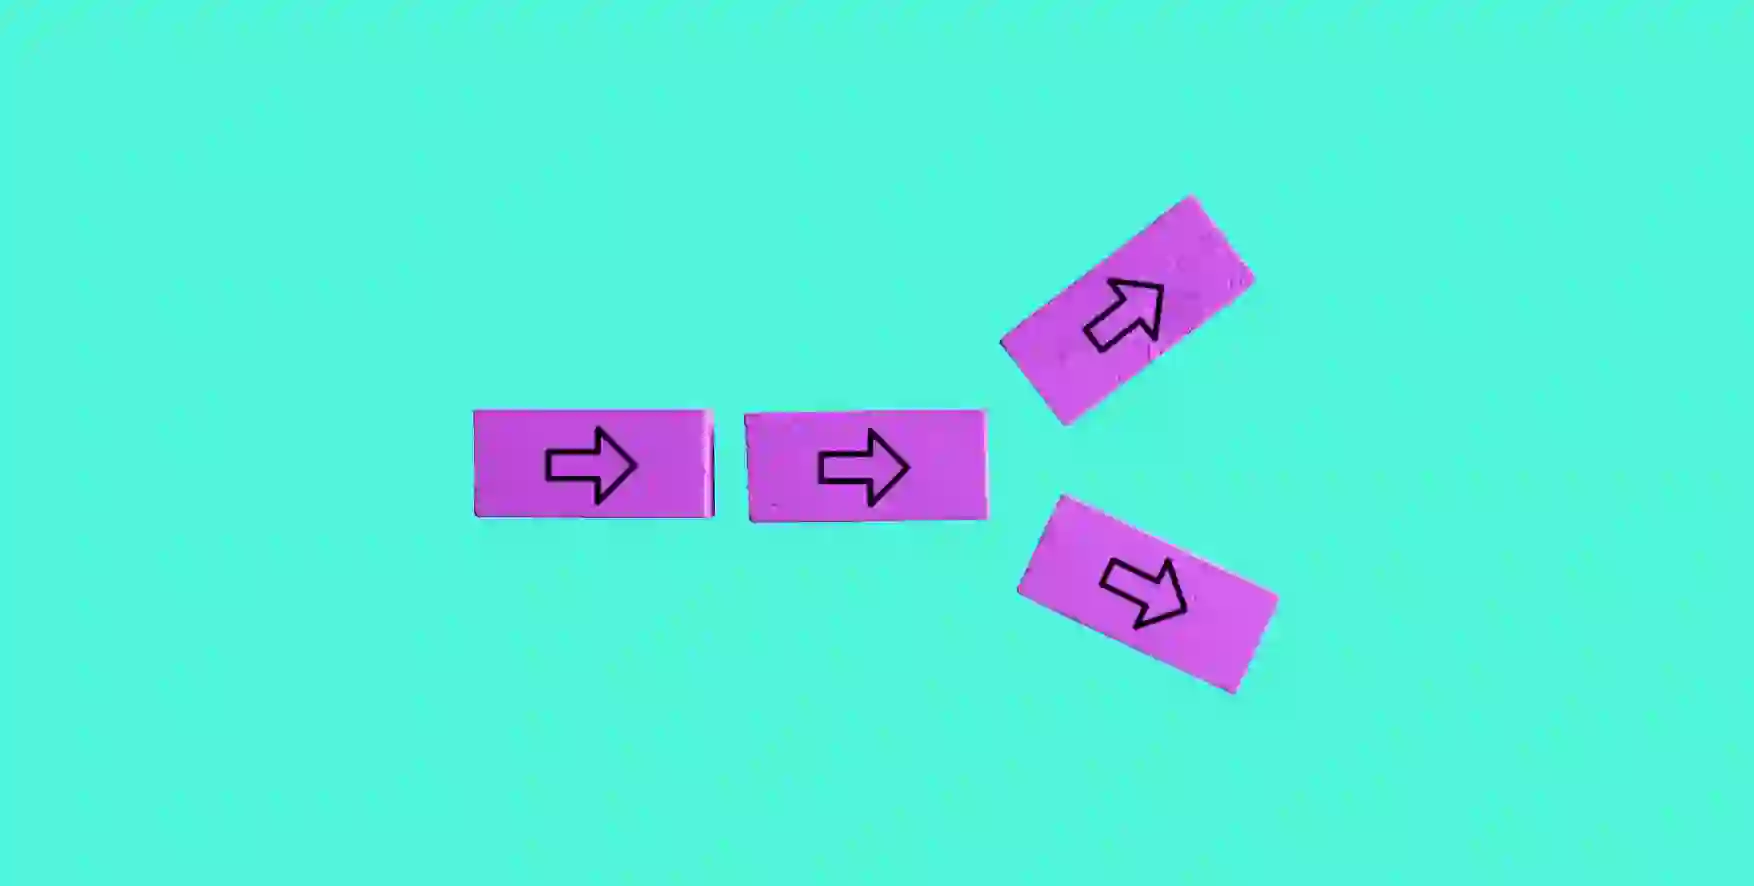 arrows on purple cards on green background